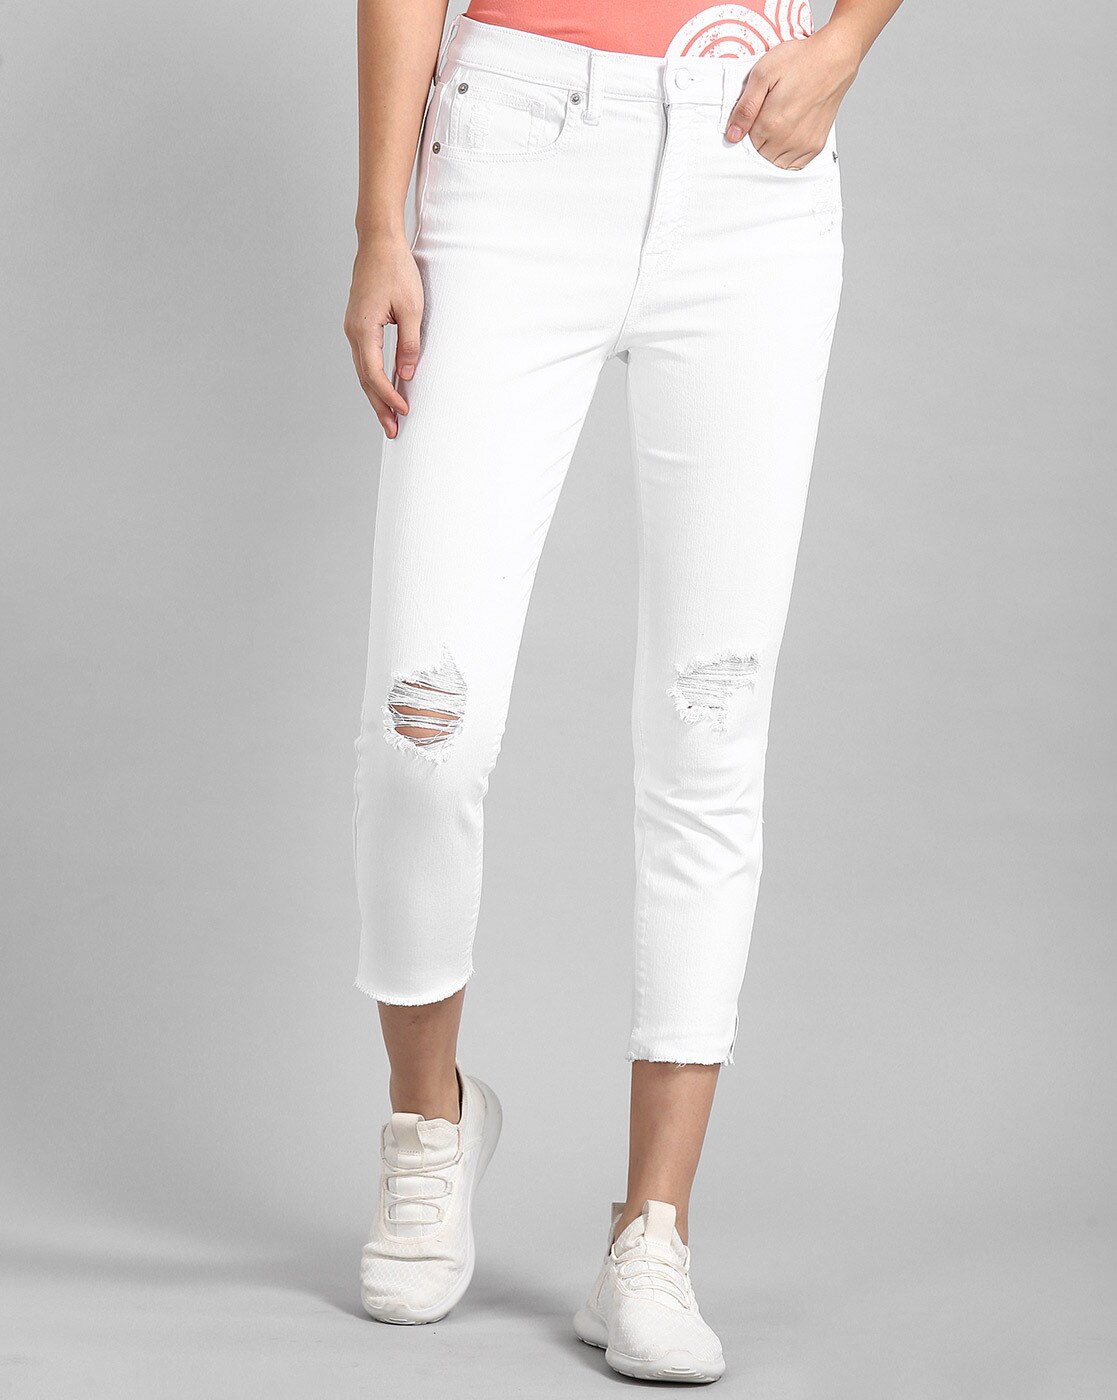 gap high waisted white jeans